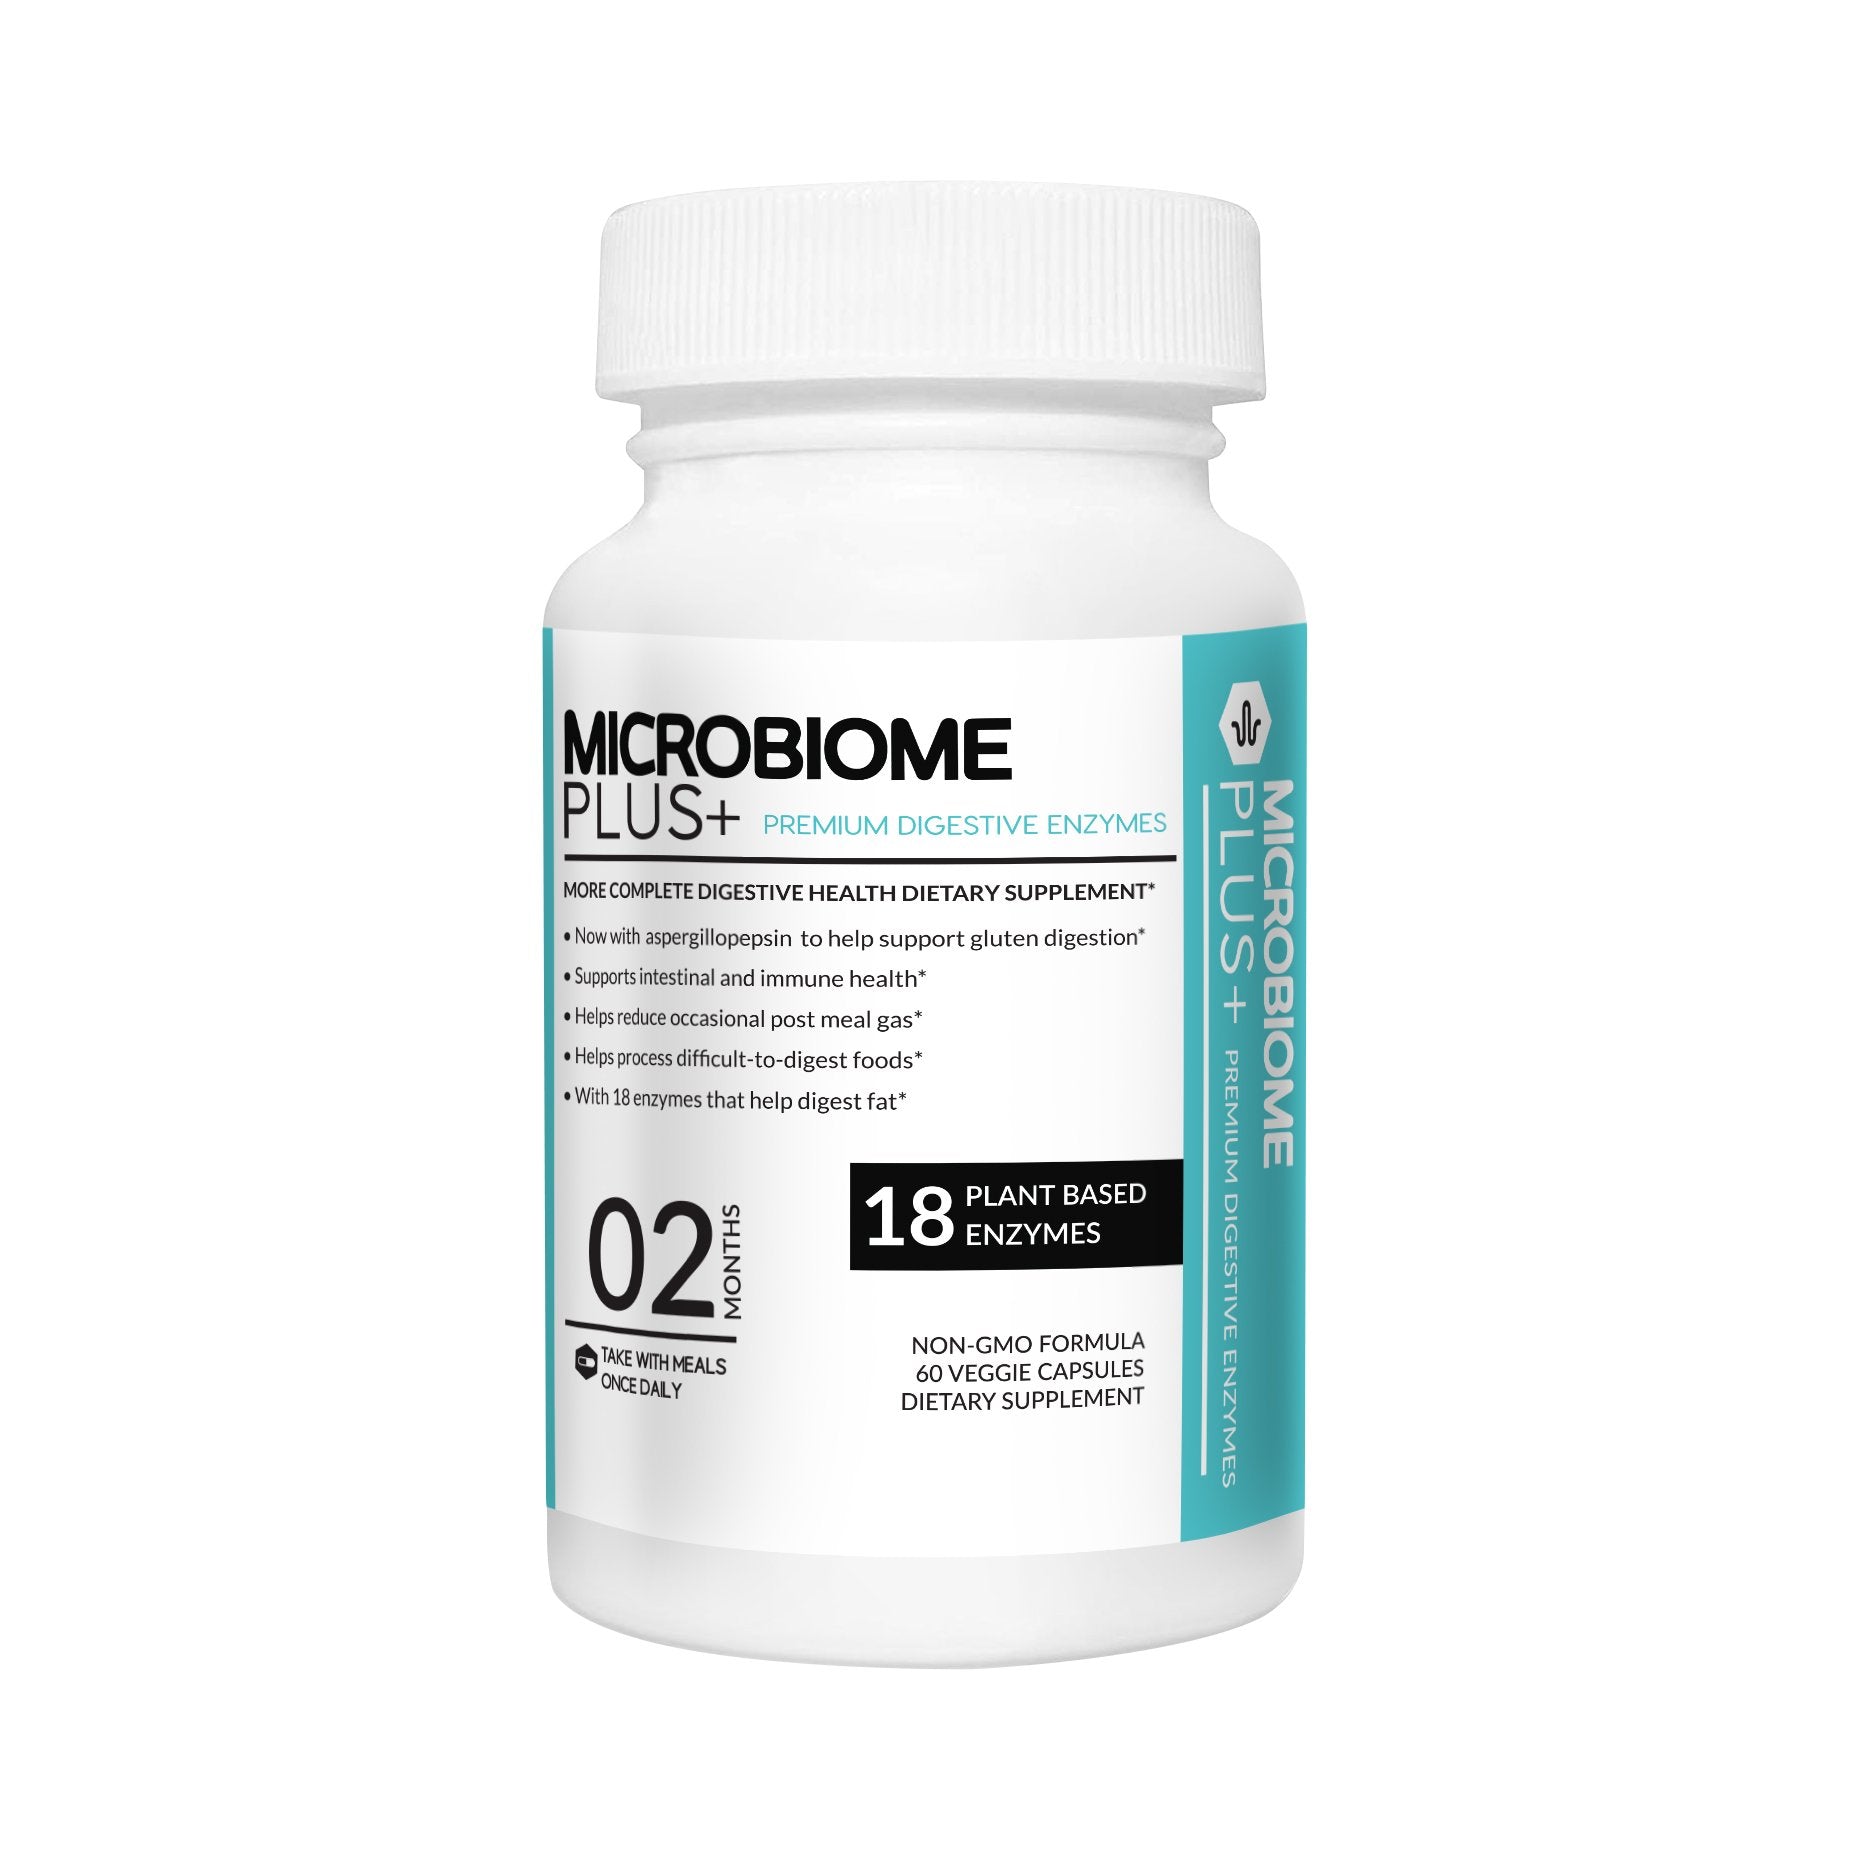 Microbiome Plus+ Premium Digestive Enzymes (18 Enzymes)